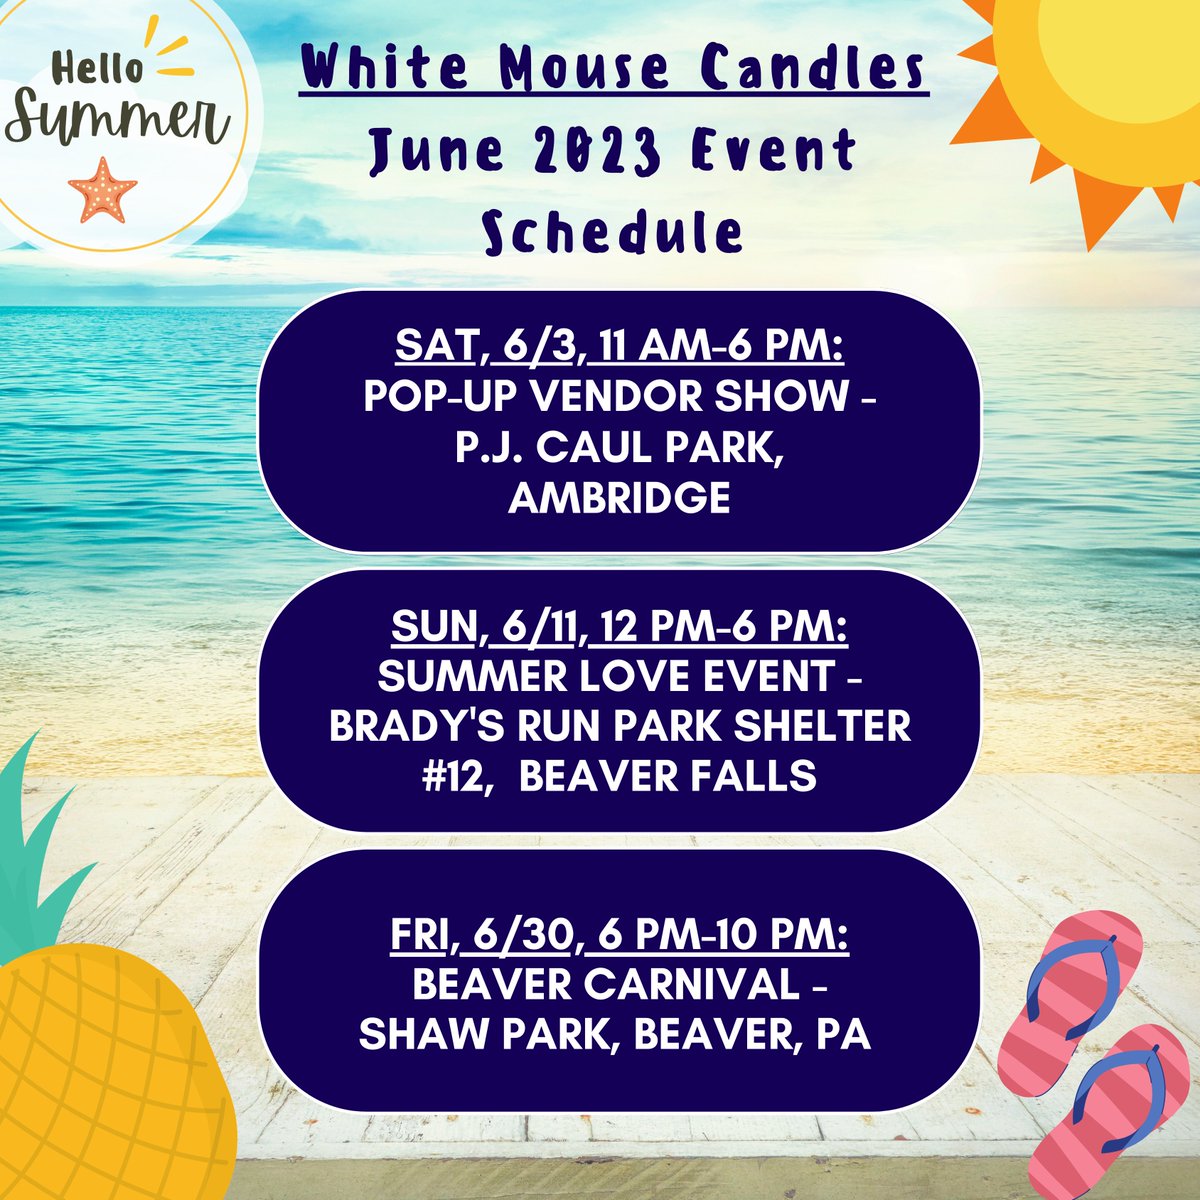 Mark your calendars! Join us at these events in June! Whether you want relaxation, ambiance, or the perfect gift, you'll find it at our booth.🌞#soycandle #soymelts #summercandles #shoplocal   #beavercountypa #ambridge #beaverfallspa #beaverpa #welcomesummer #handmade #craftshow